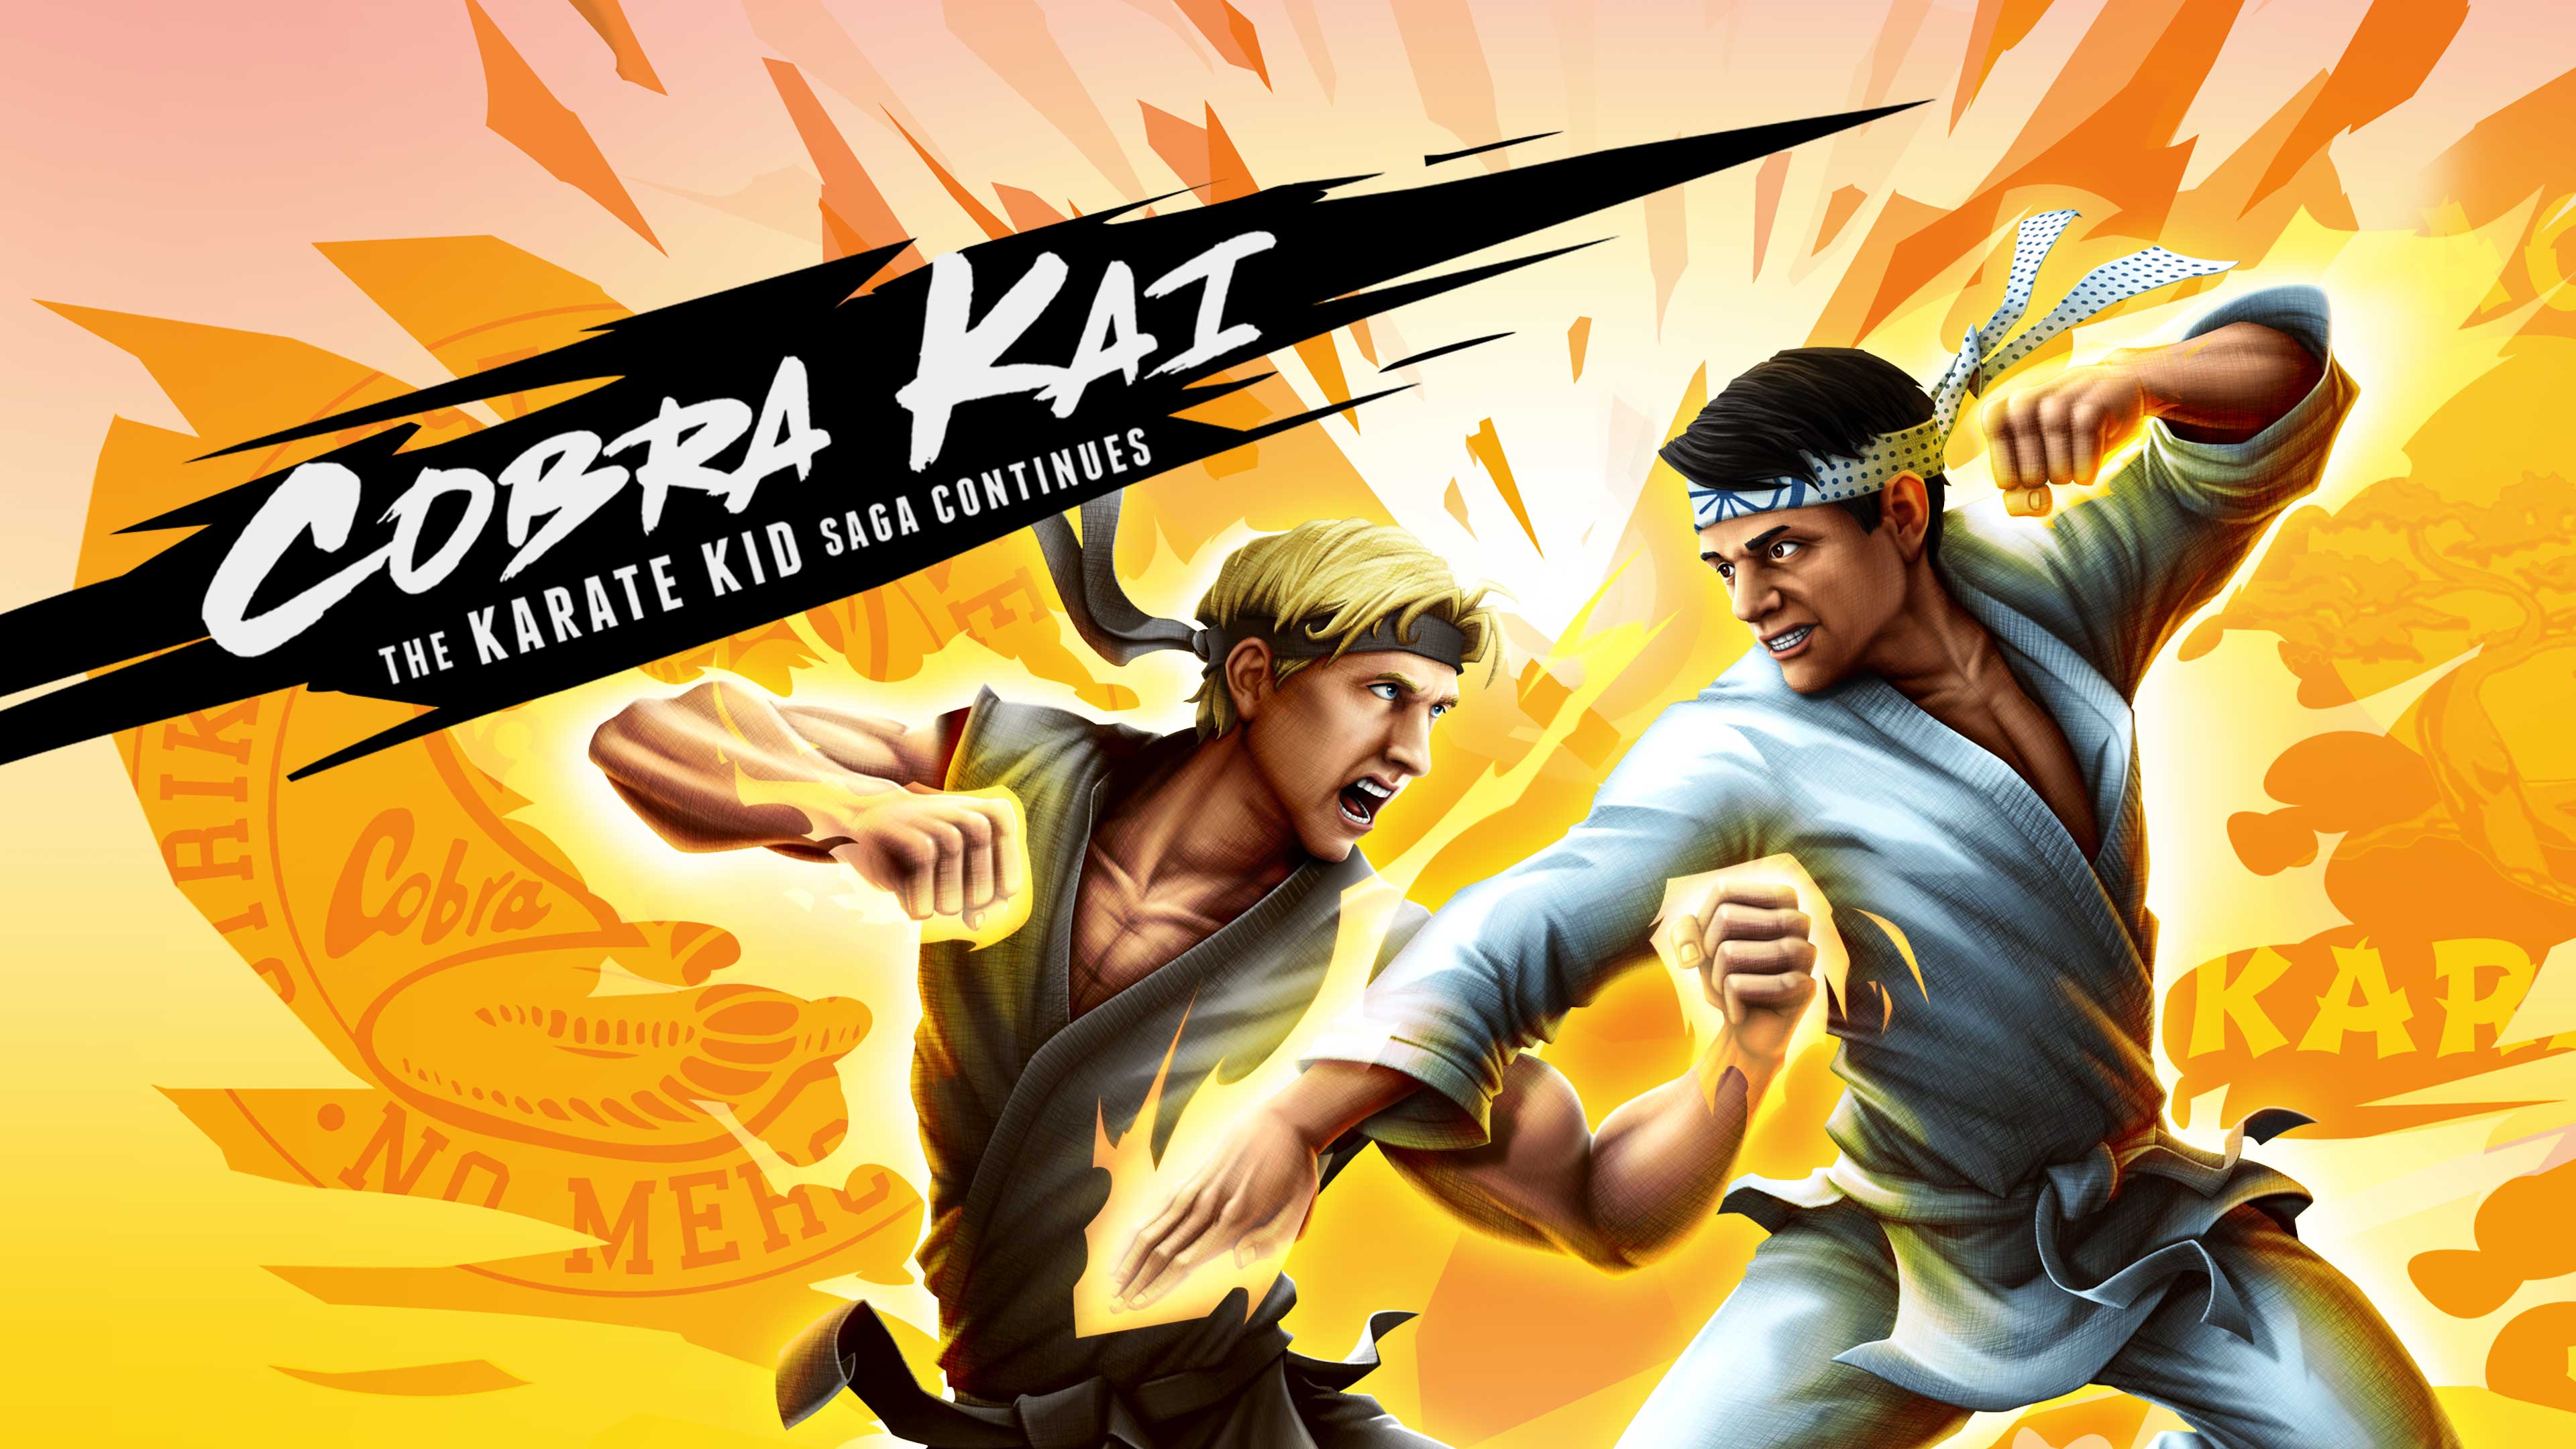 the way of the karate kid download